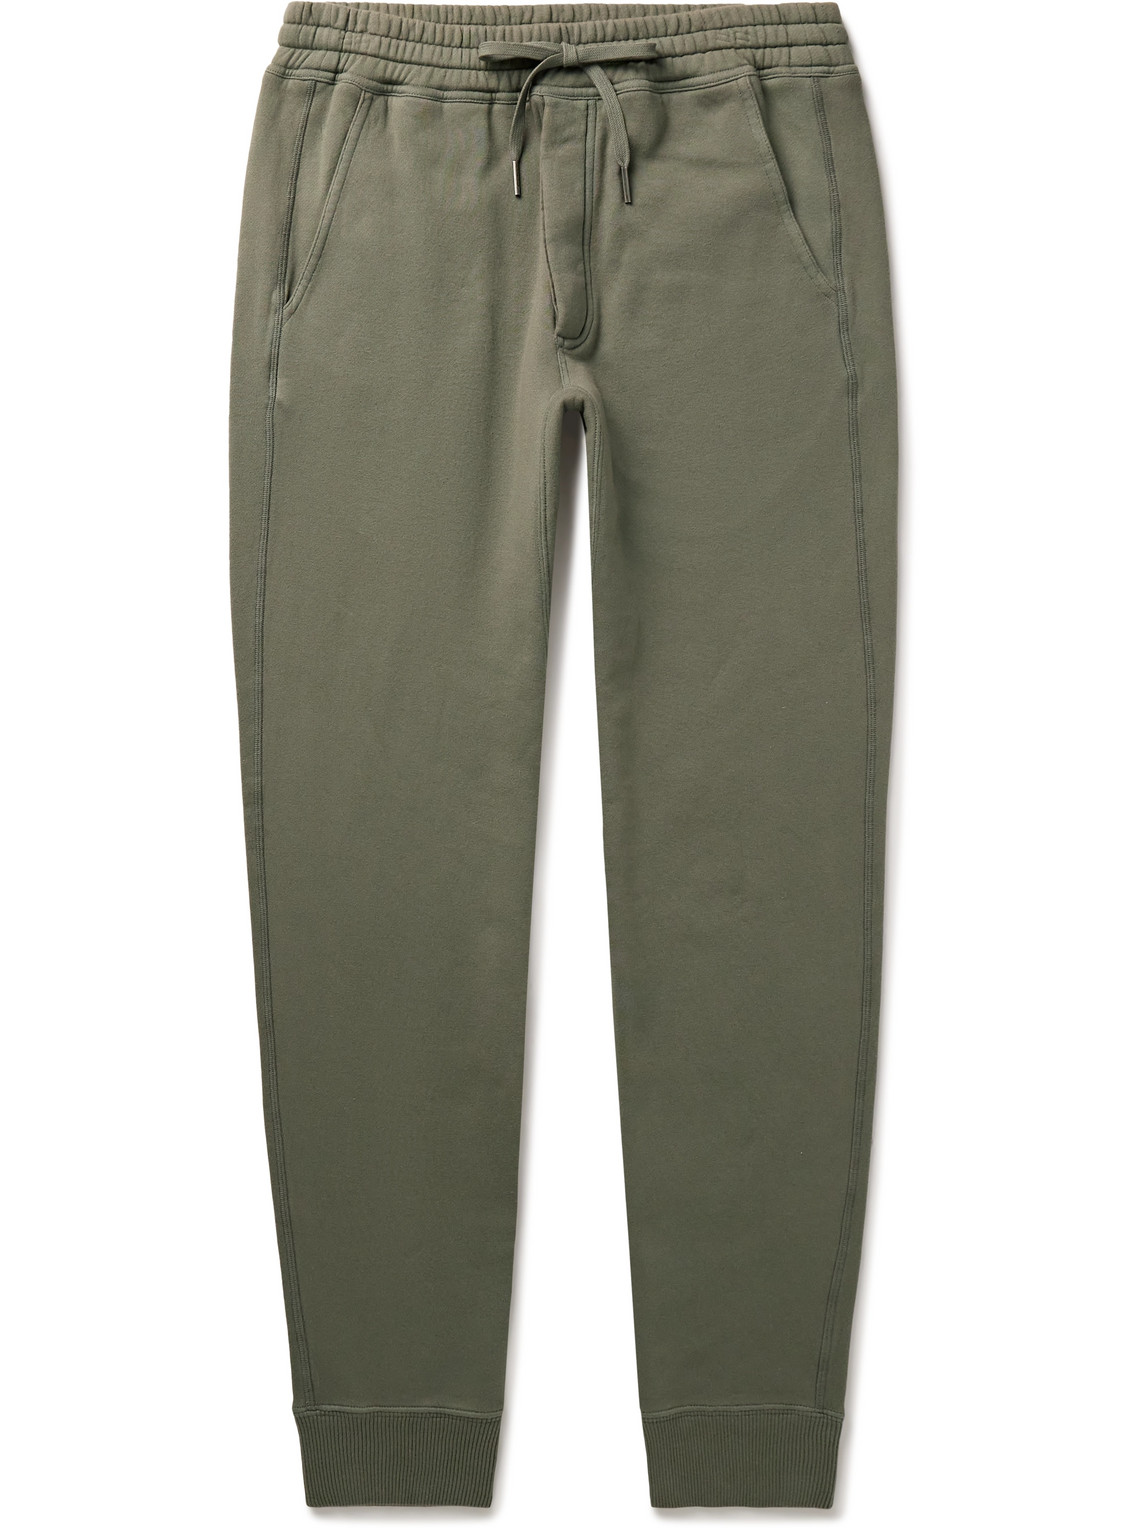 TOM FORD - Tapered Garment-Dyed Cotton-Jersey Sweatpants - Men - Green - IT 60 von TOM FORD